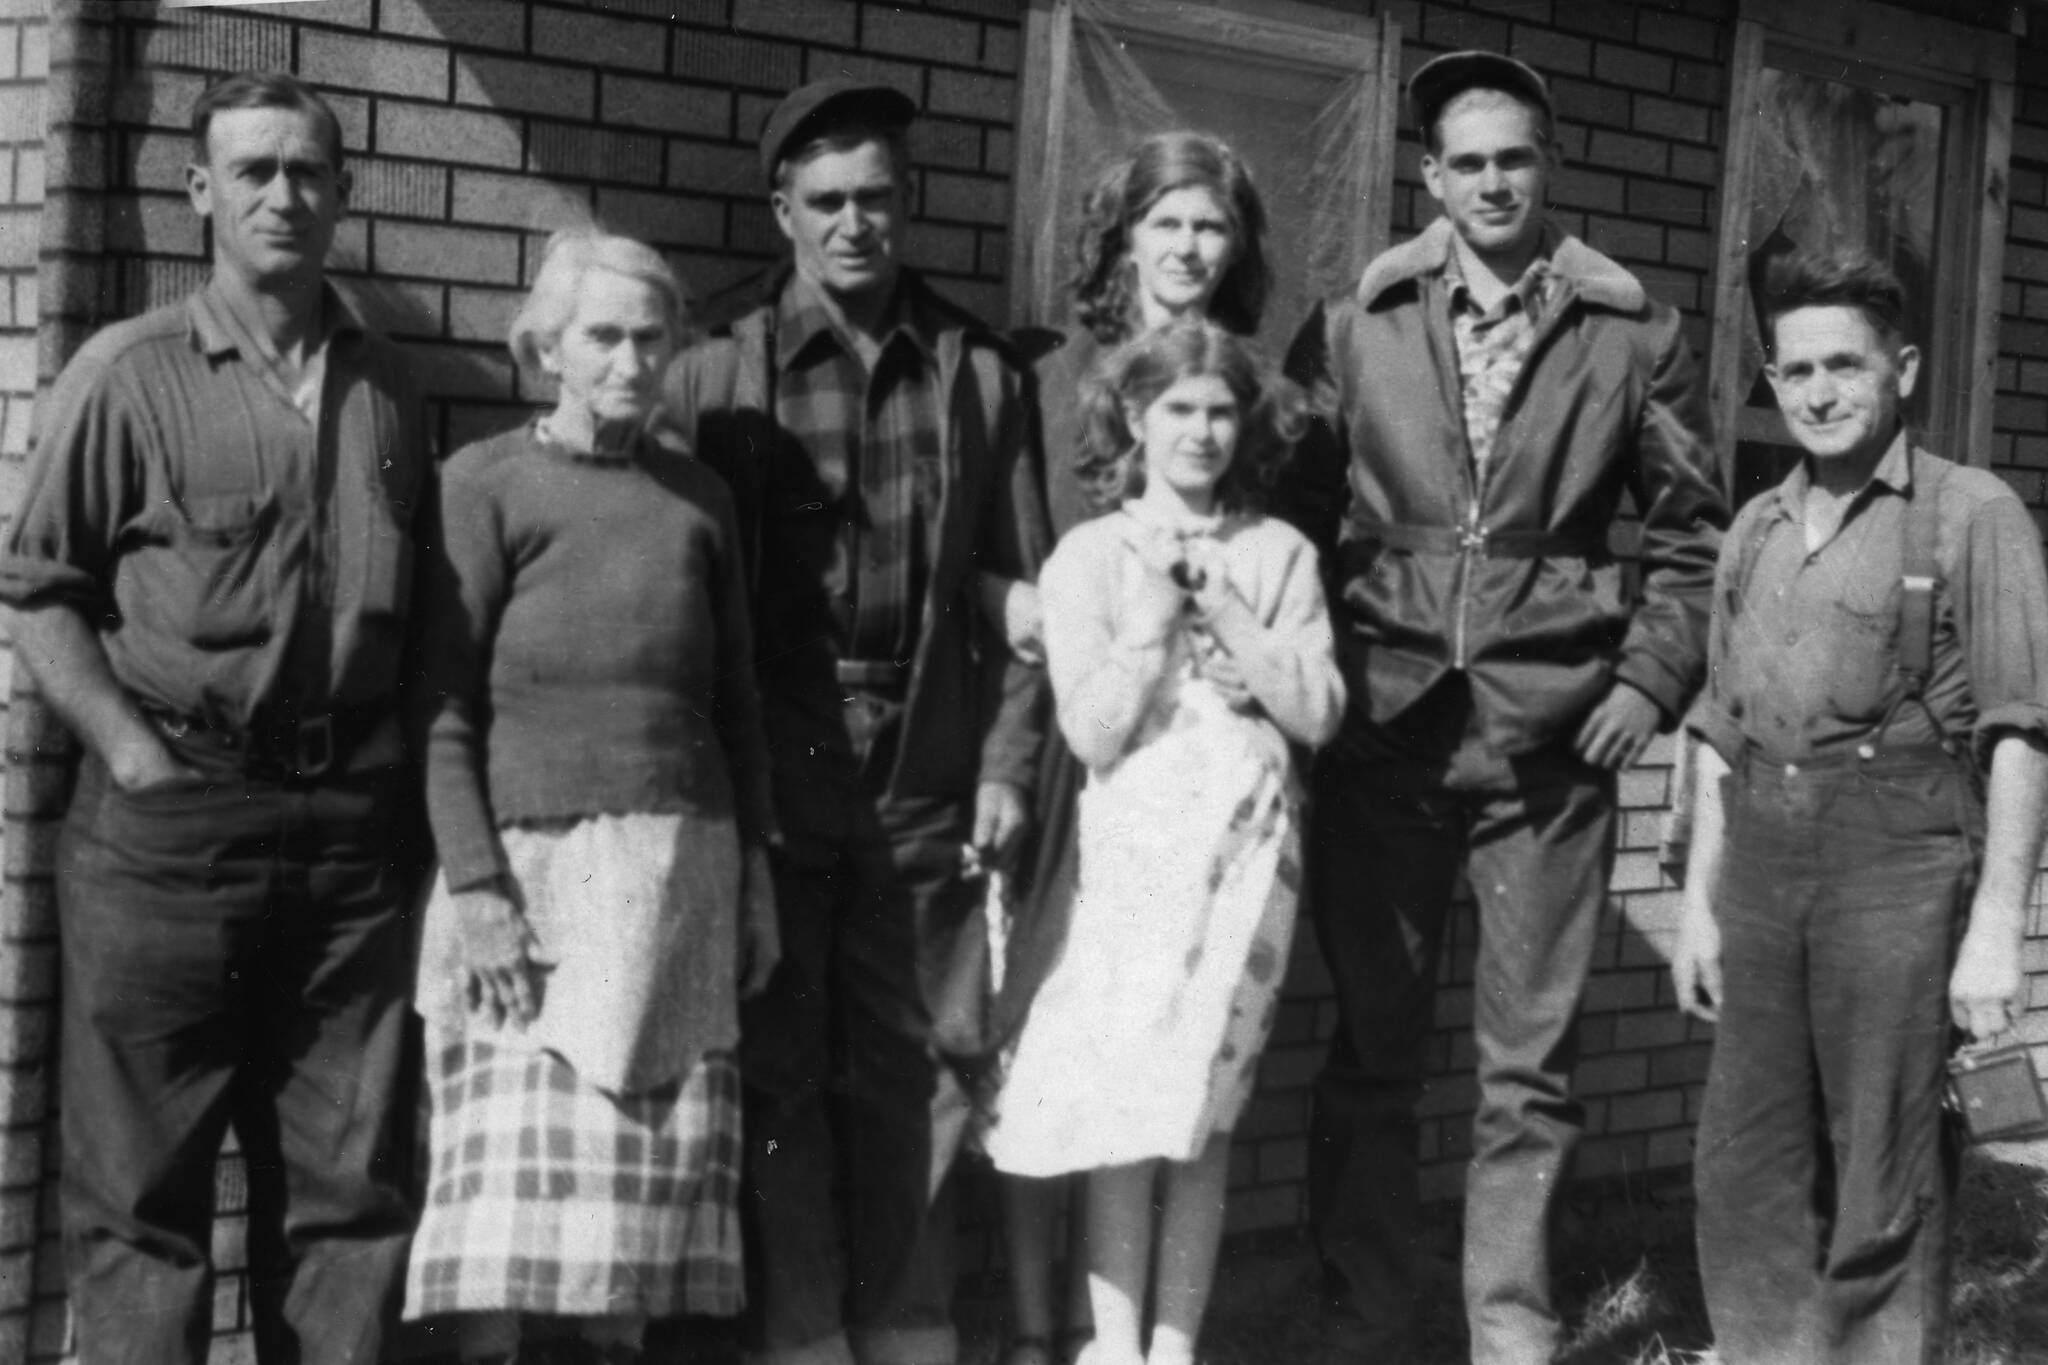 Some of the Keelers assembled with family matriarch Samantha (second from left) in this 1952 photograph taken in Oregon. Others, L-R: George, Lawrence with wife Lorna, daughter April and son Larry, and Floyd, also known as “Uncle Shorty.” Photo courtesy of the Keeler Family Collection.